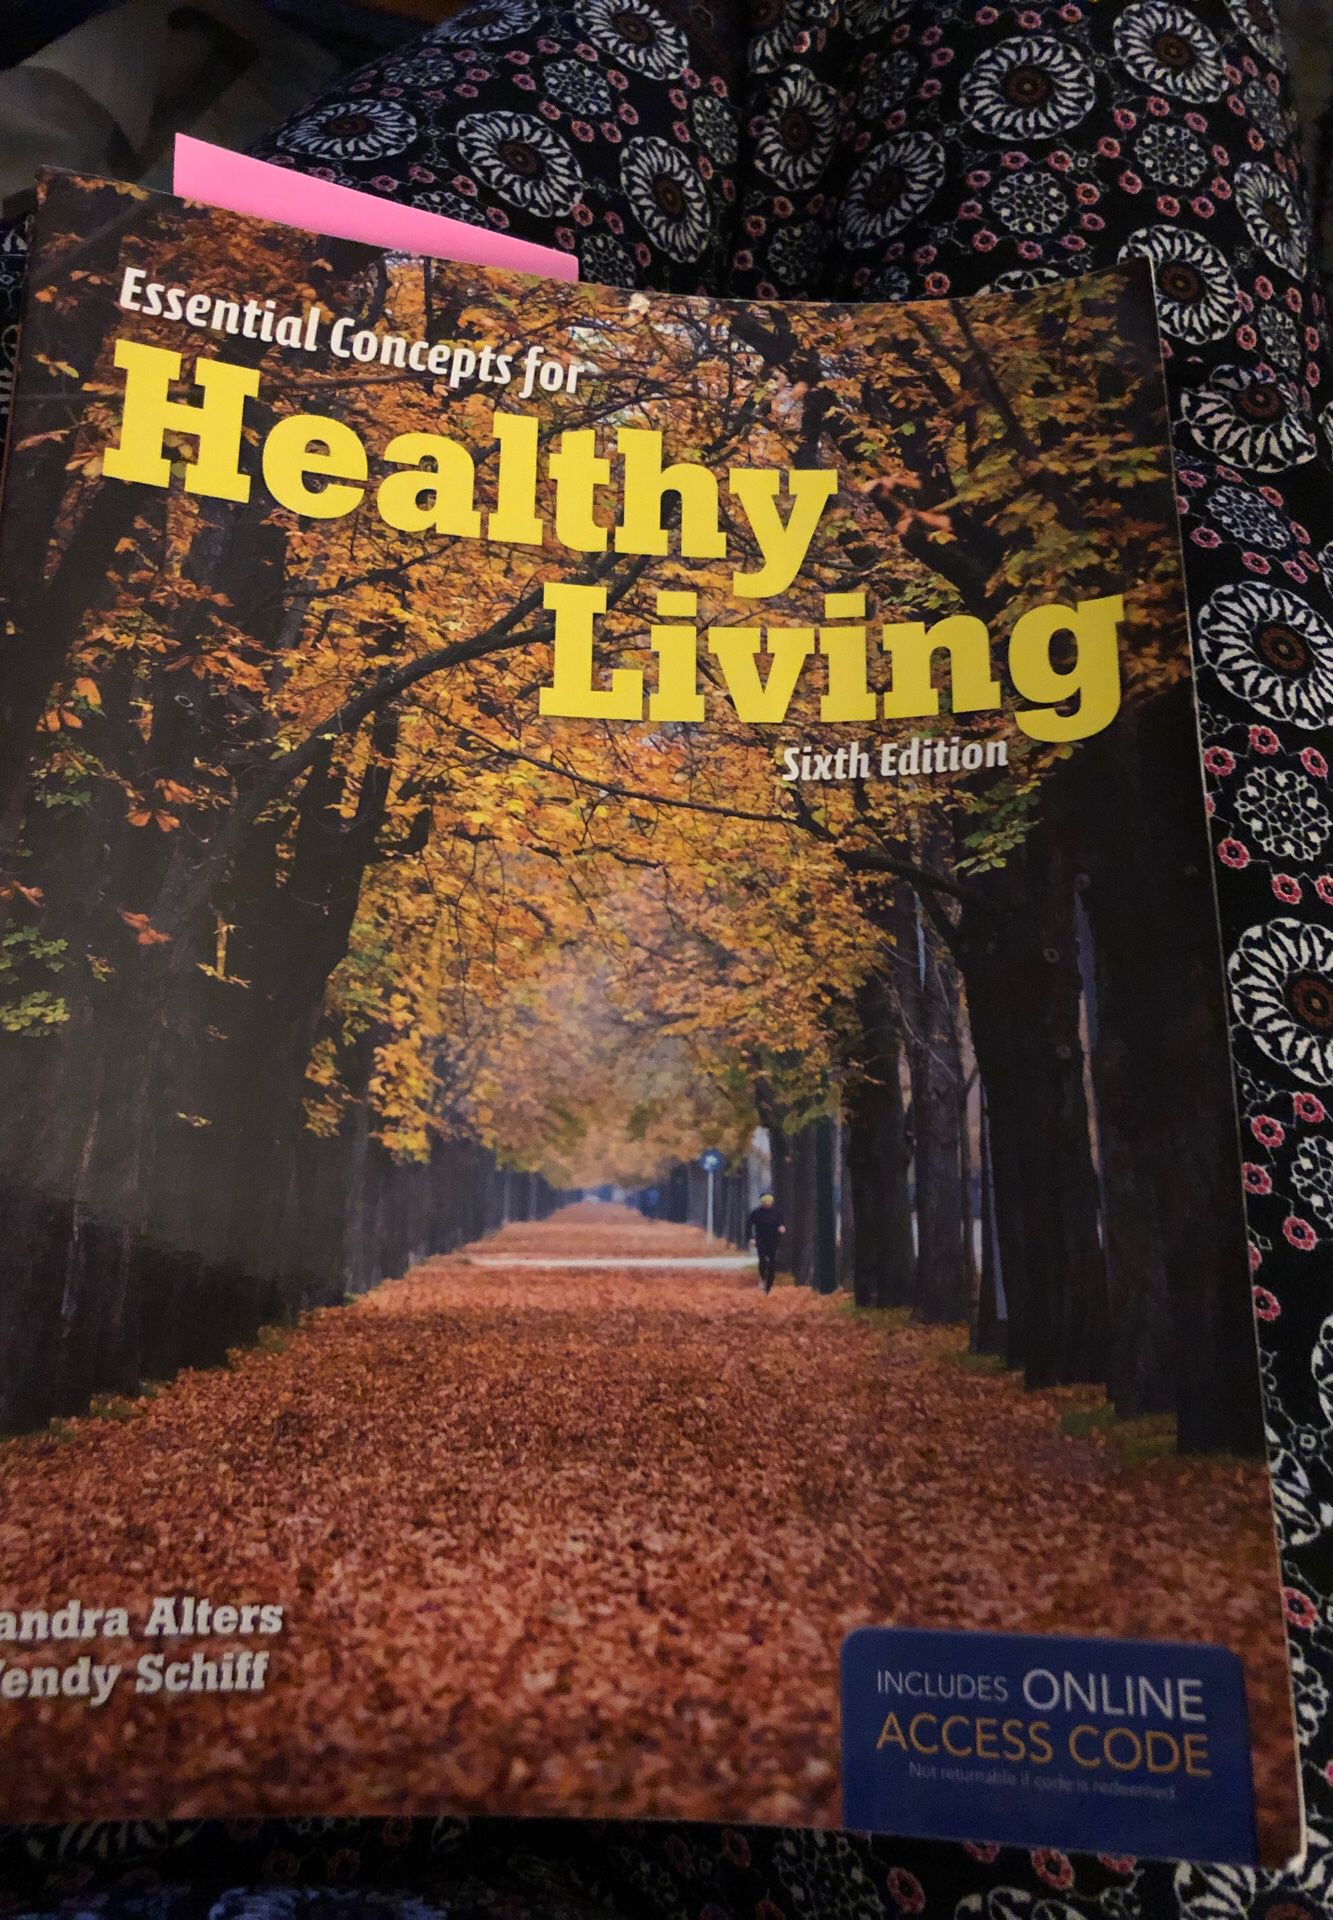 Essential concepts for healthy living 6th edition